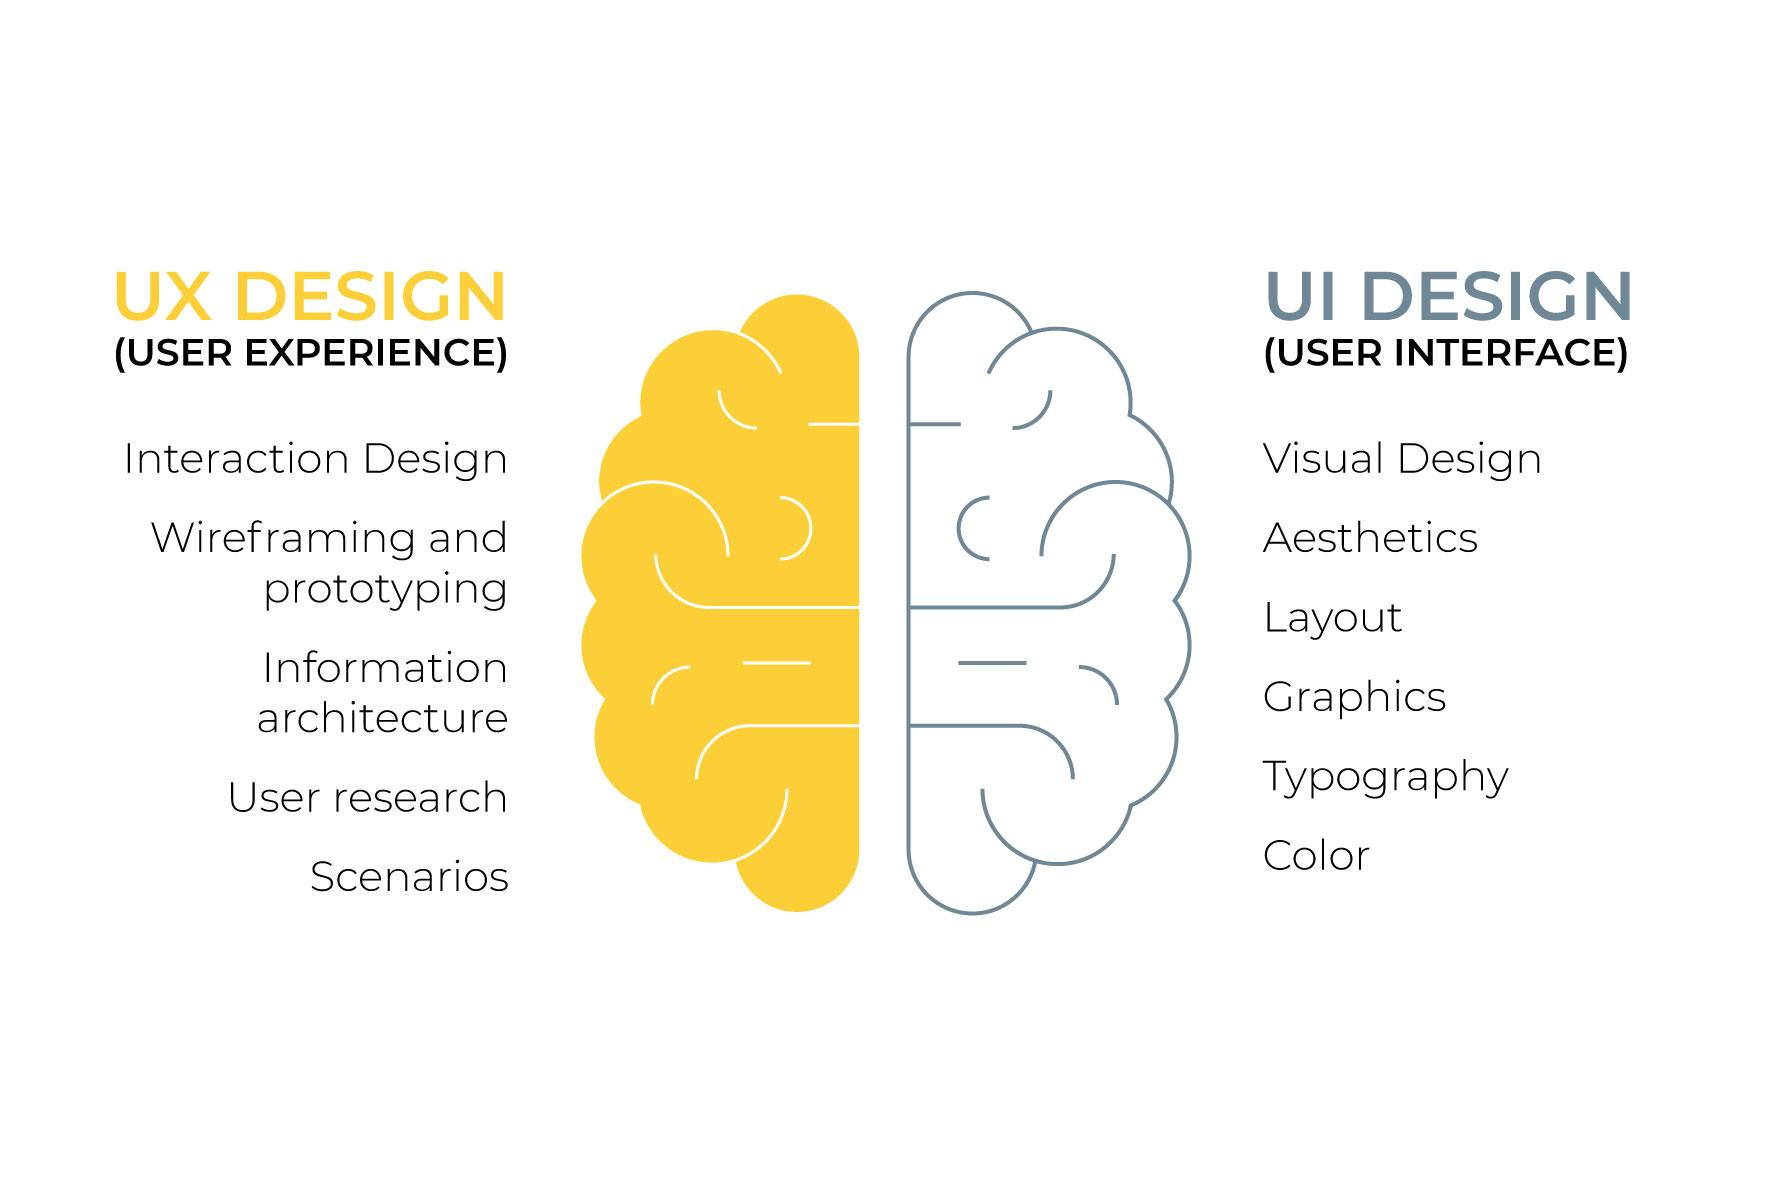 UX Design (User Experience) vs. UI Design (User Interface. UX includes Interaction Design, Wireframing and Prototyping, Information Architecture, User Research, Scenarios. UI includes Visual Design, Aesthetics, Layout, Graphics, Typography, Color